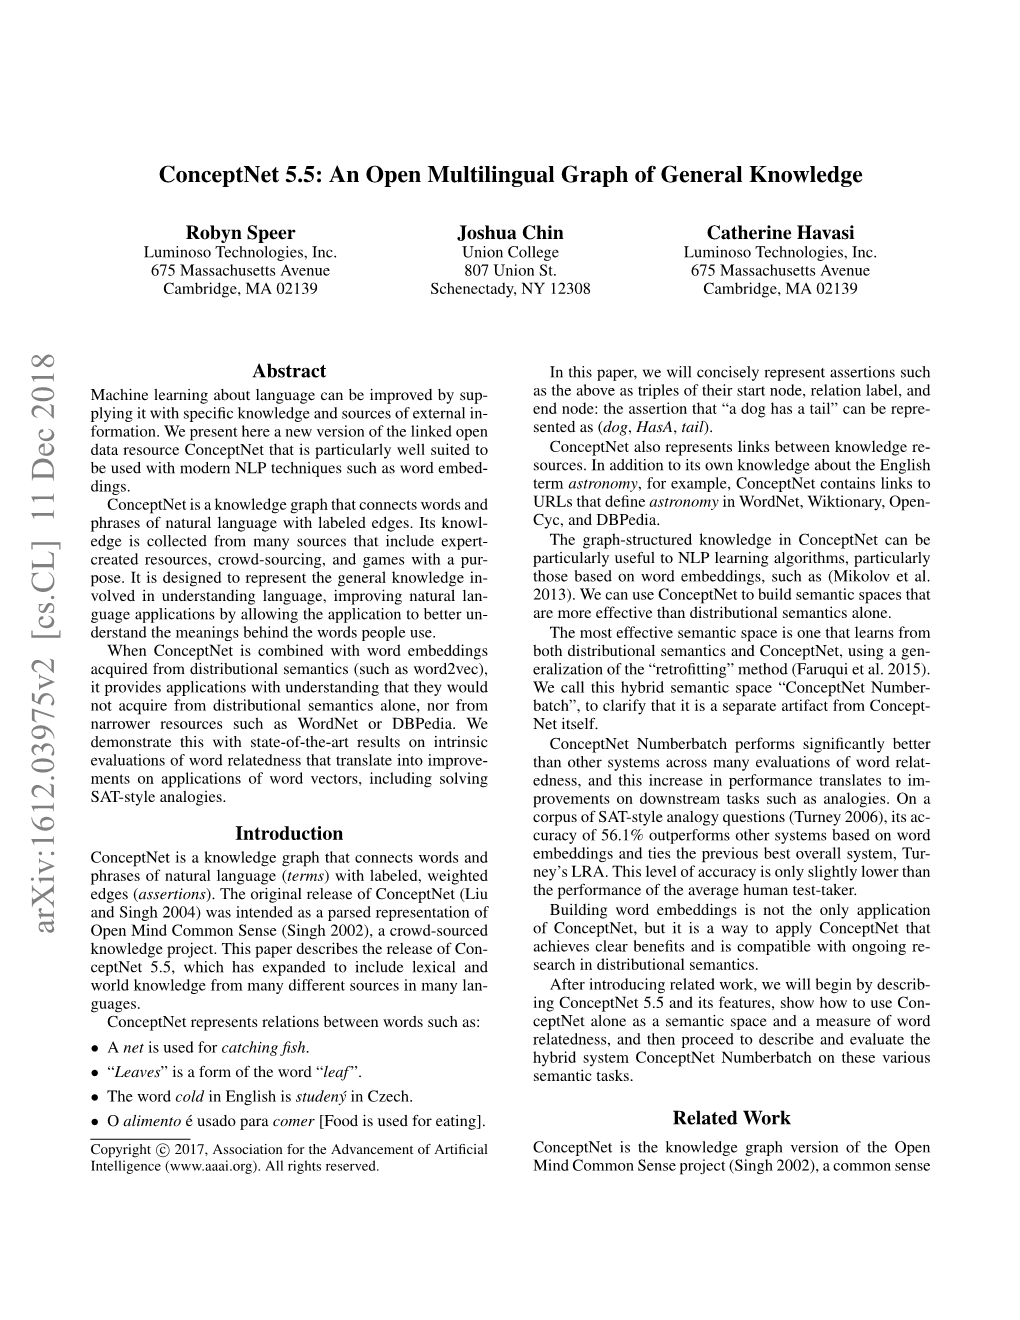 Arxiv:1612.03975V2 [Cs.CL] 11 Dec 2018 Open Mind Common Sense (Singh 2002), a Crowd-Sourced of Conceptnet, but It Is a Way to Apply Conceptnet That Knowledge Project